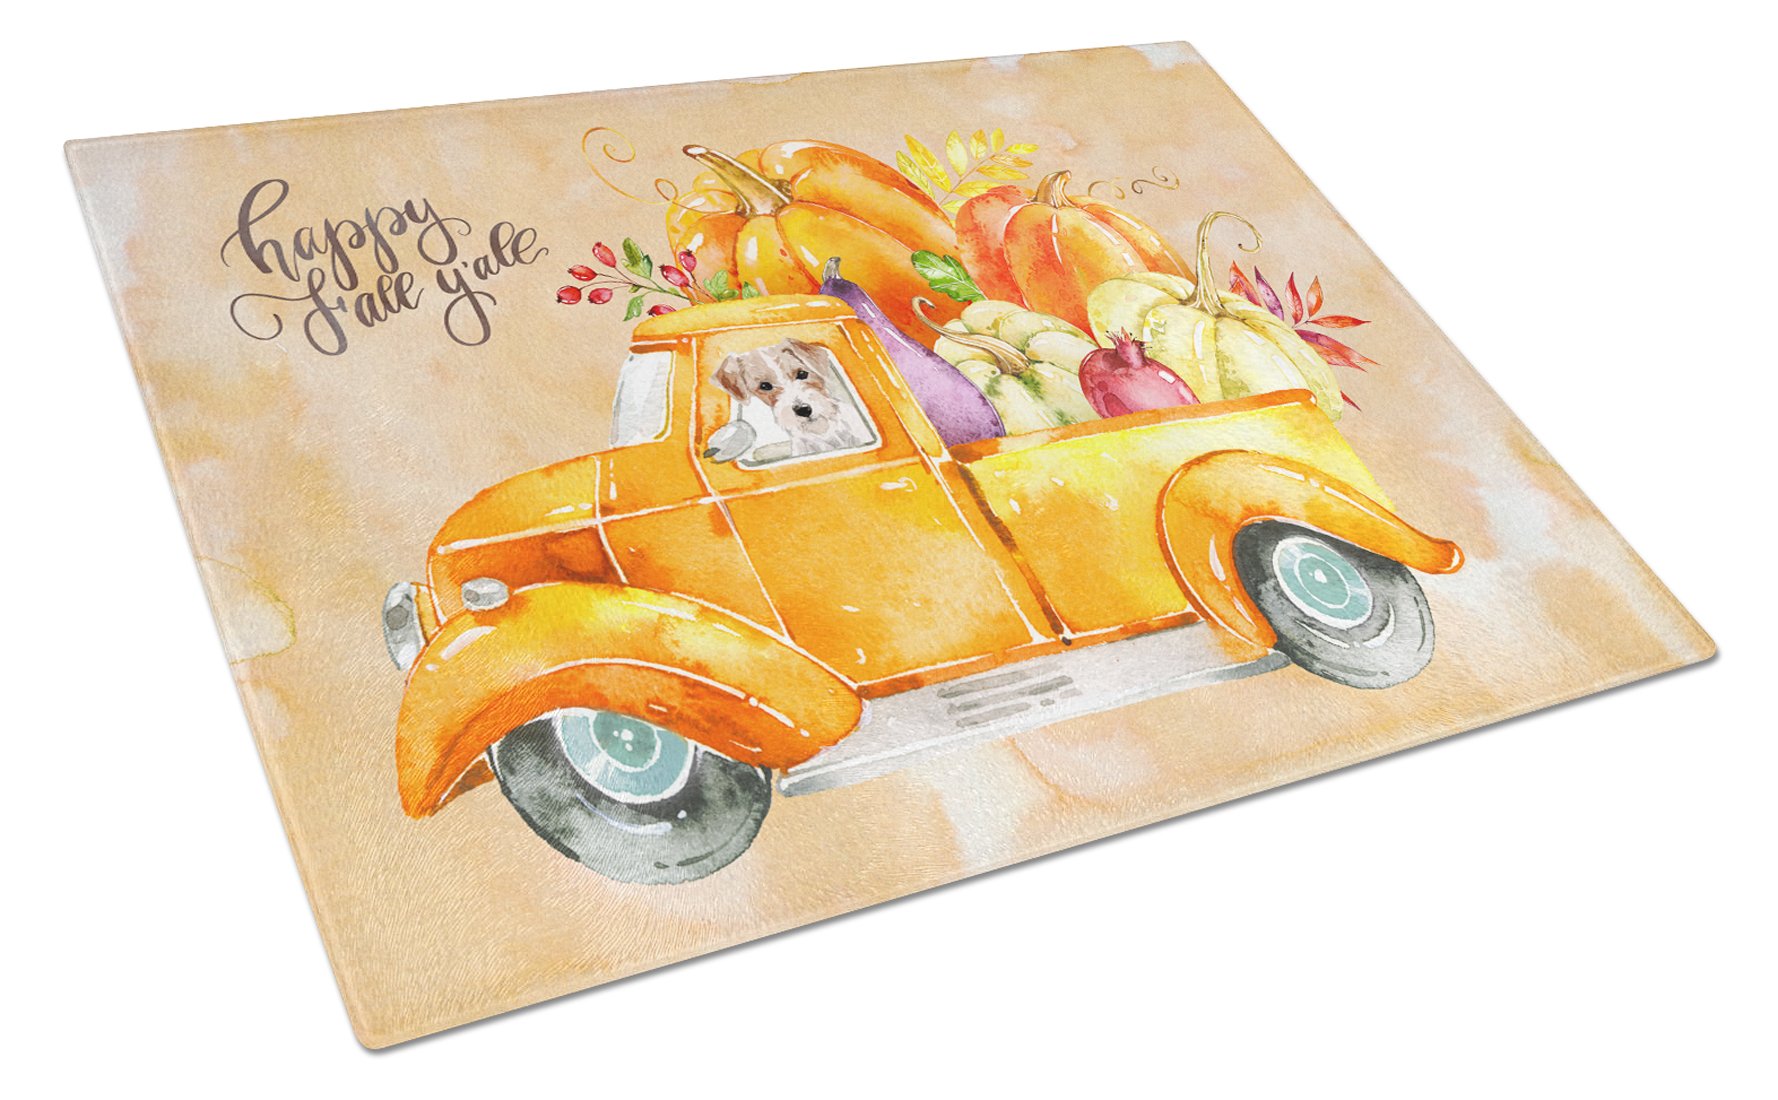 Fall Harvest Jack Russell Terrier Glass Cutting Board Large CK2679LCB by Caroline's Treasures